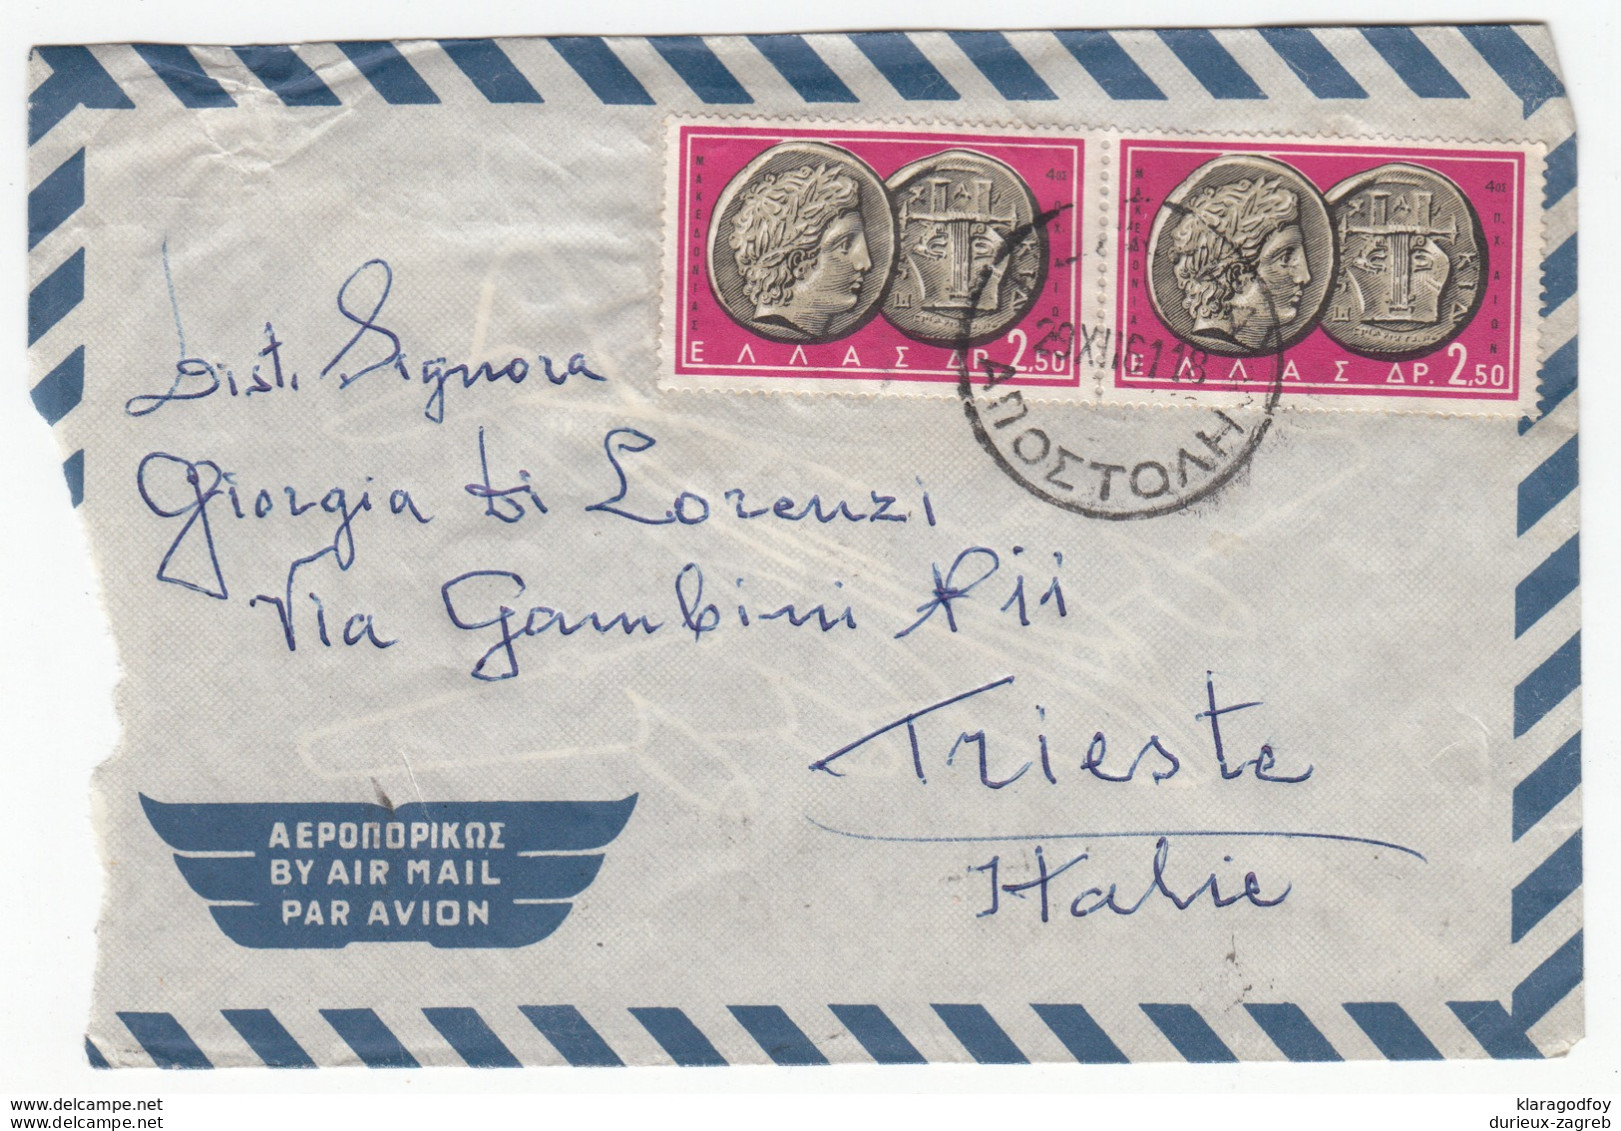 Greece Air Mail Letter Cover Travelled 1961/1962 Kerkyra To Trieste B170310 - Covers & Documents